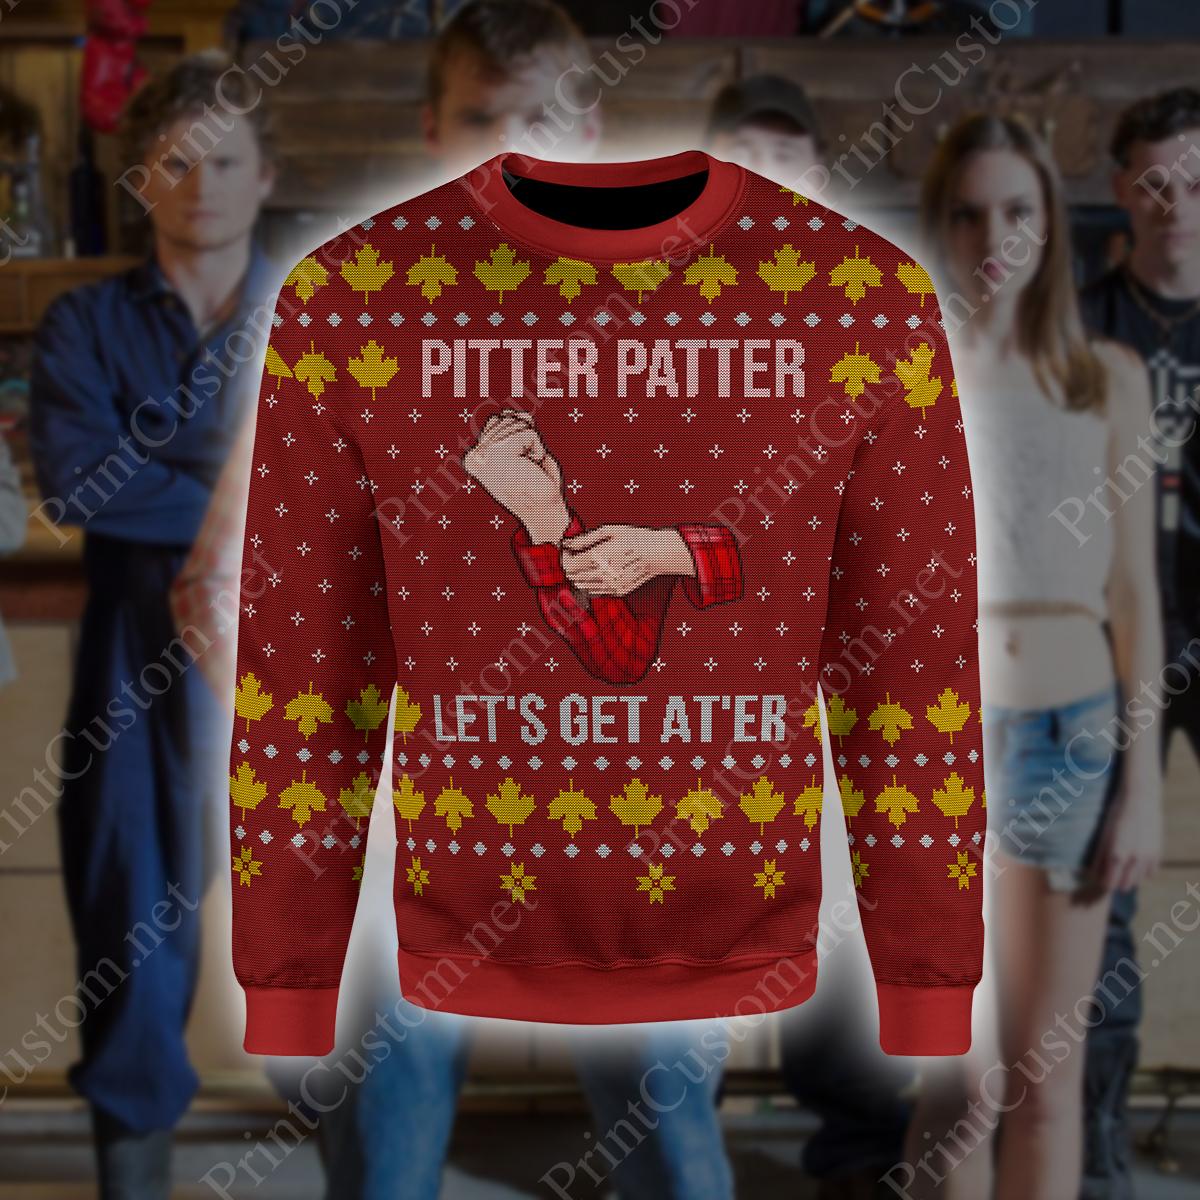 Letterkenny pitter patter let's get at'er ugly christmas sweater - maria